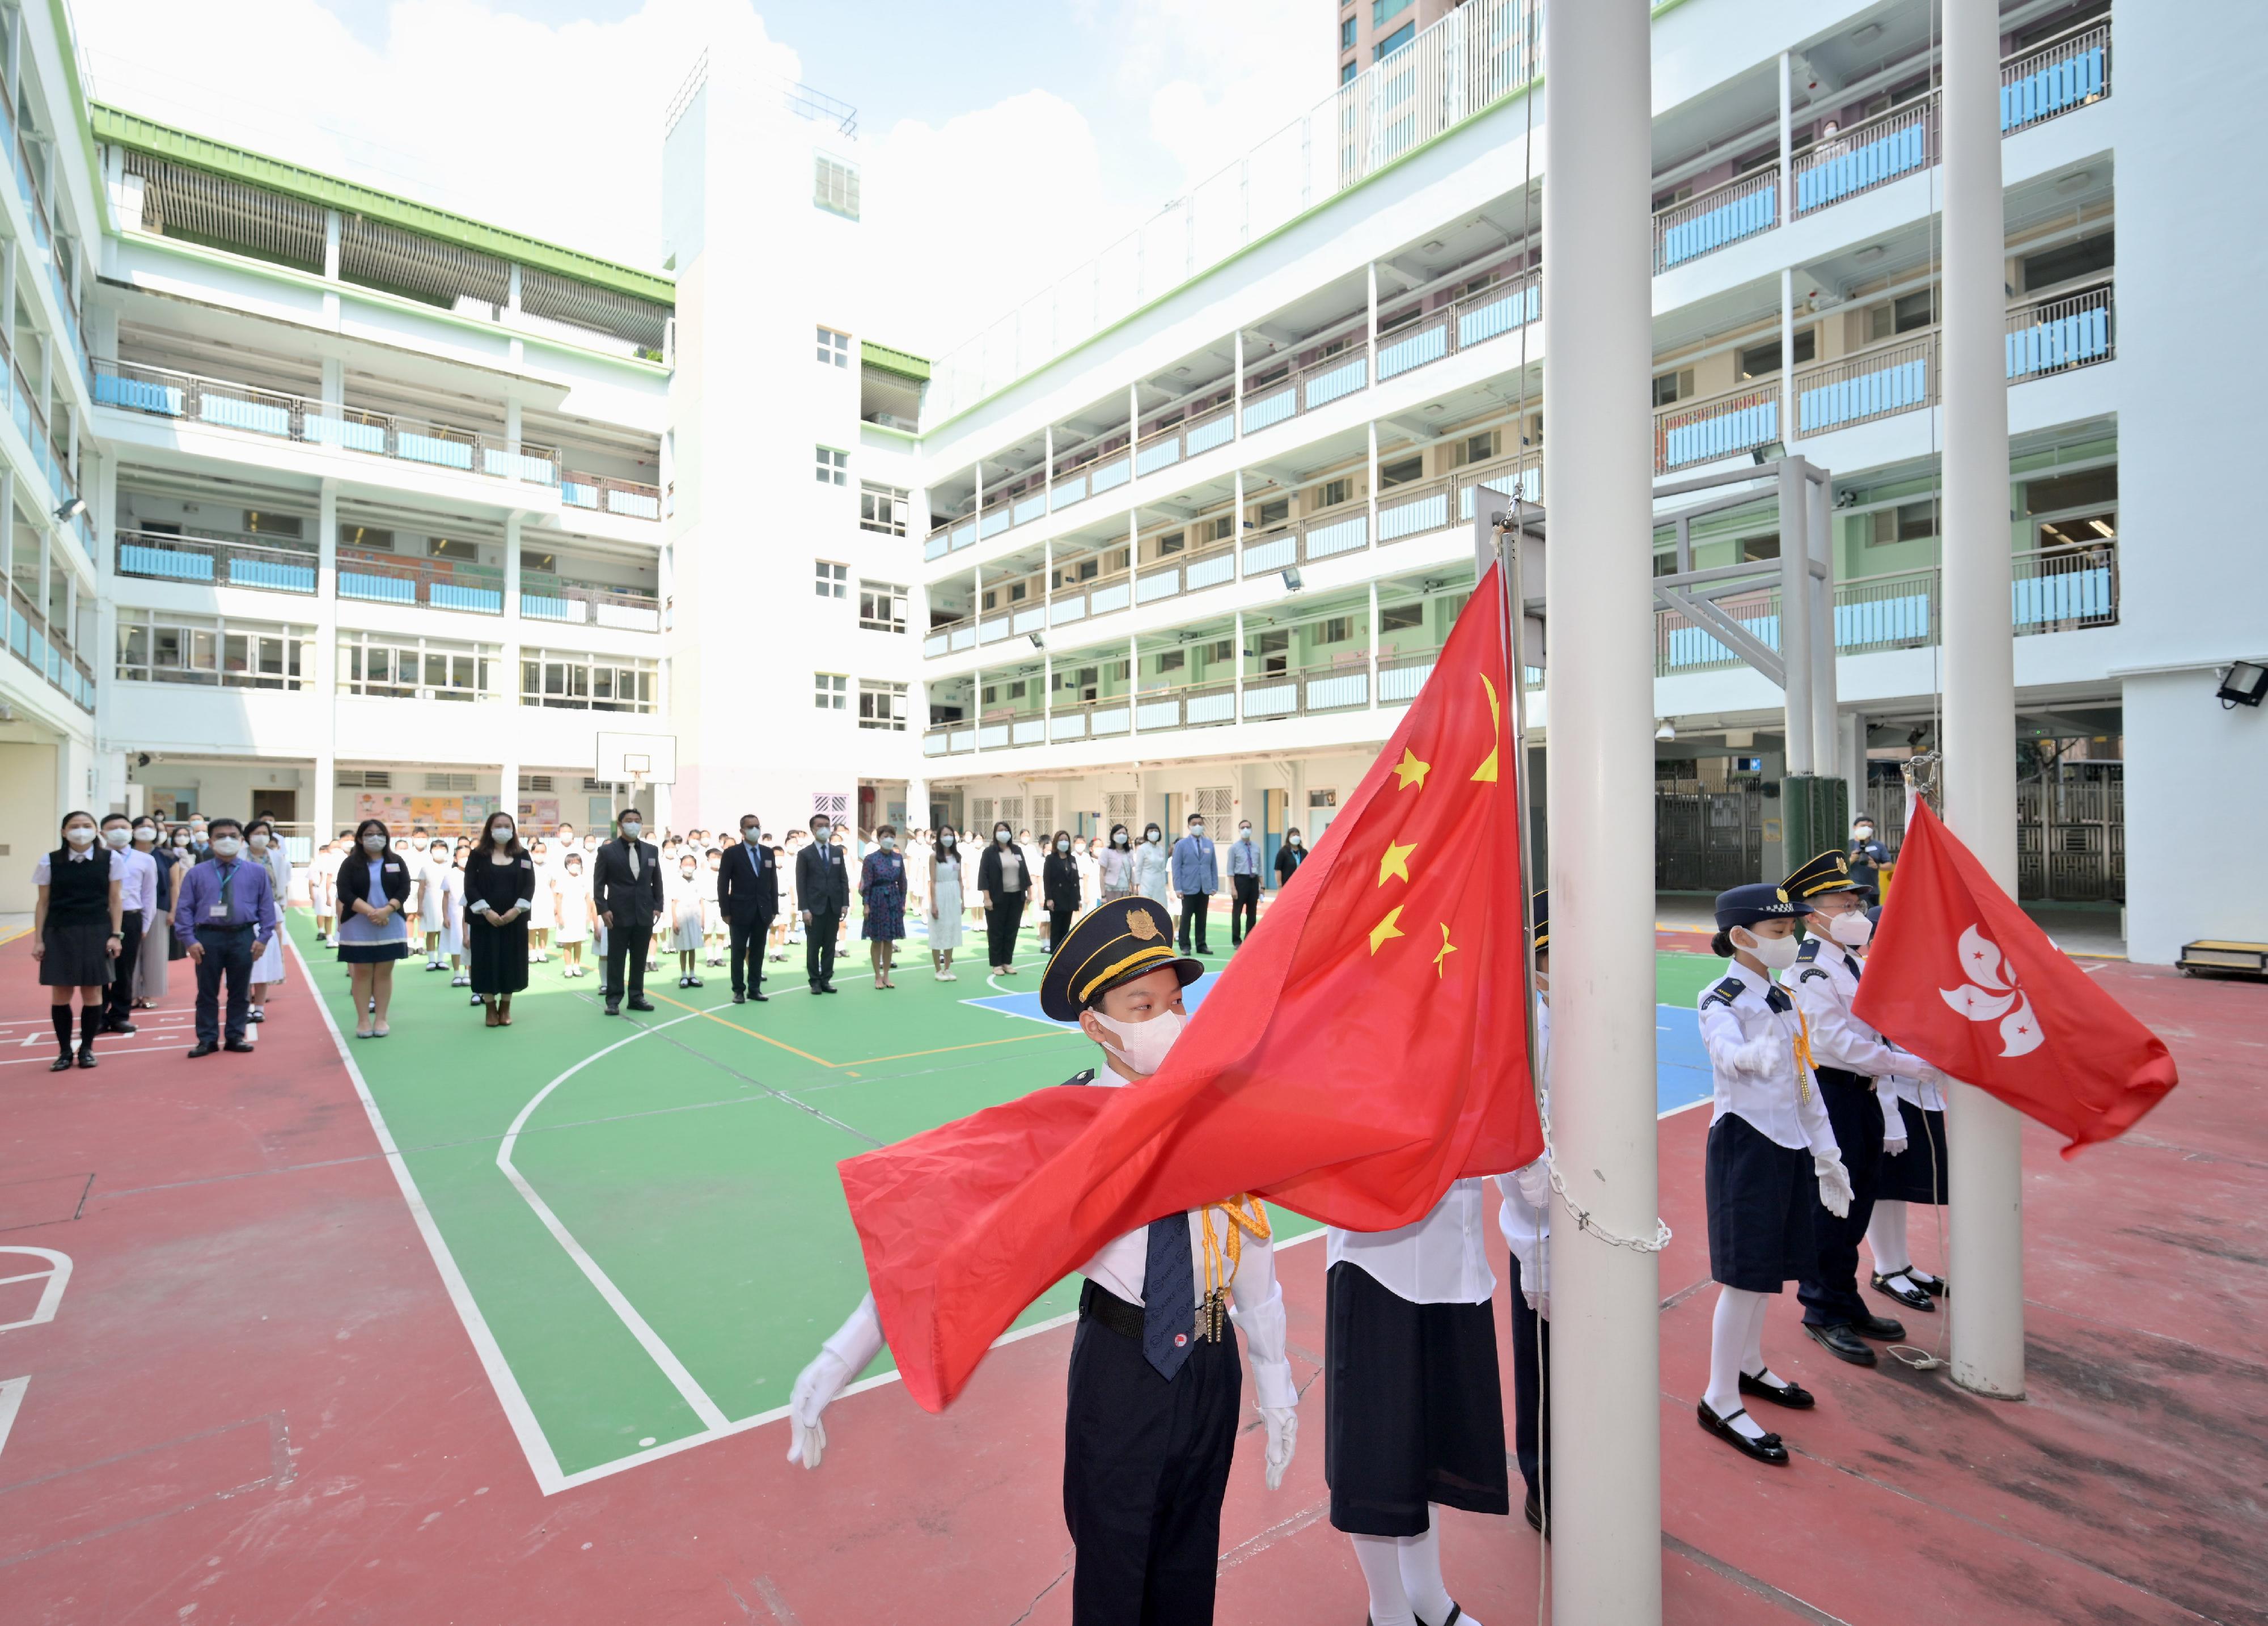 The Under Secretary for Education, Mr Sze Chun-fai, visited Farm Road Government Primary School on the first school day today (September 1). Photo shows Mr Sze (back row, seventh left) viewing the raising of the national flag with students at the school opening assembly.